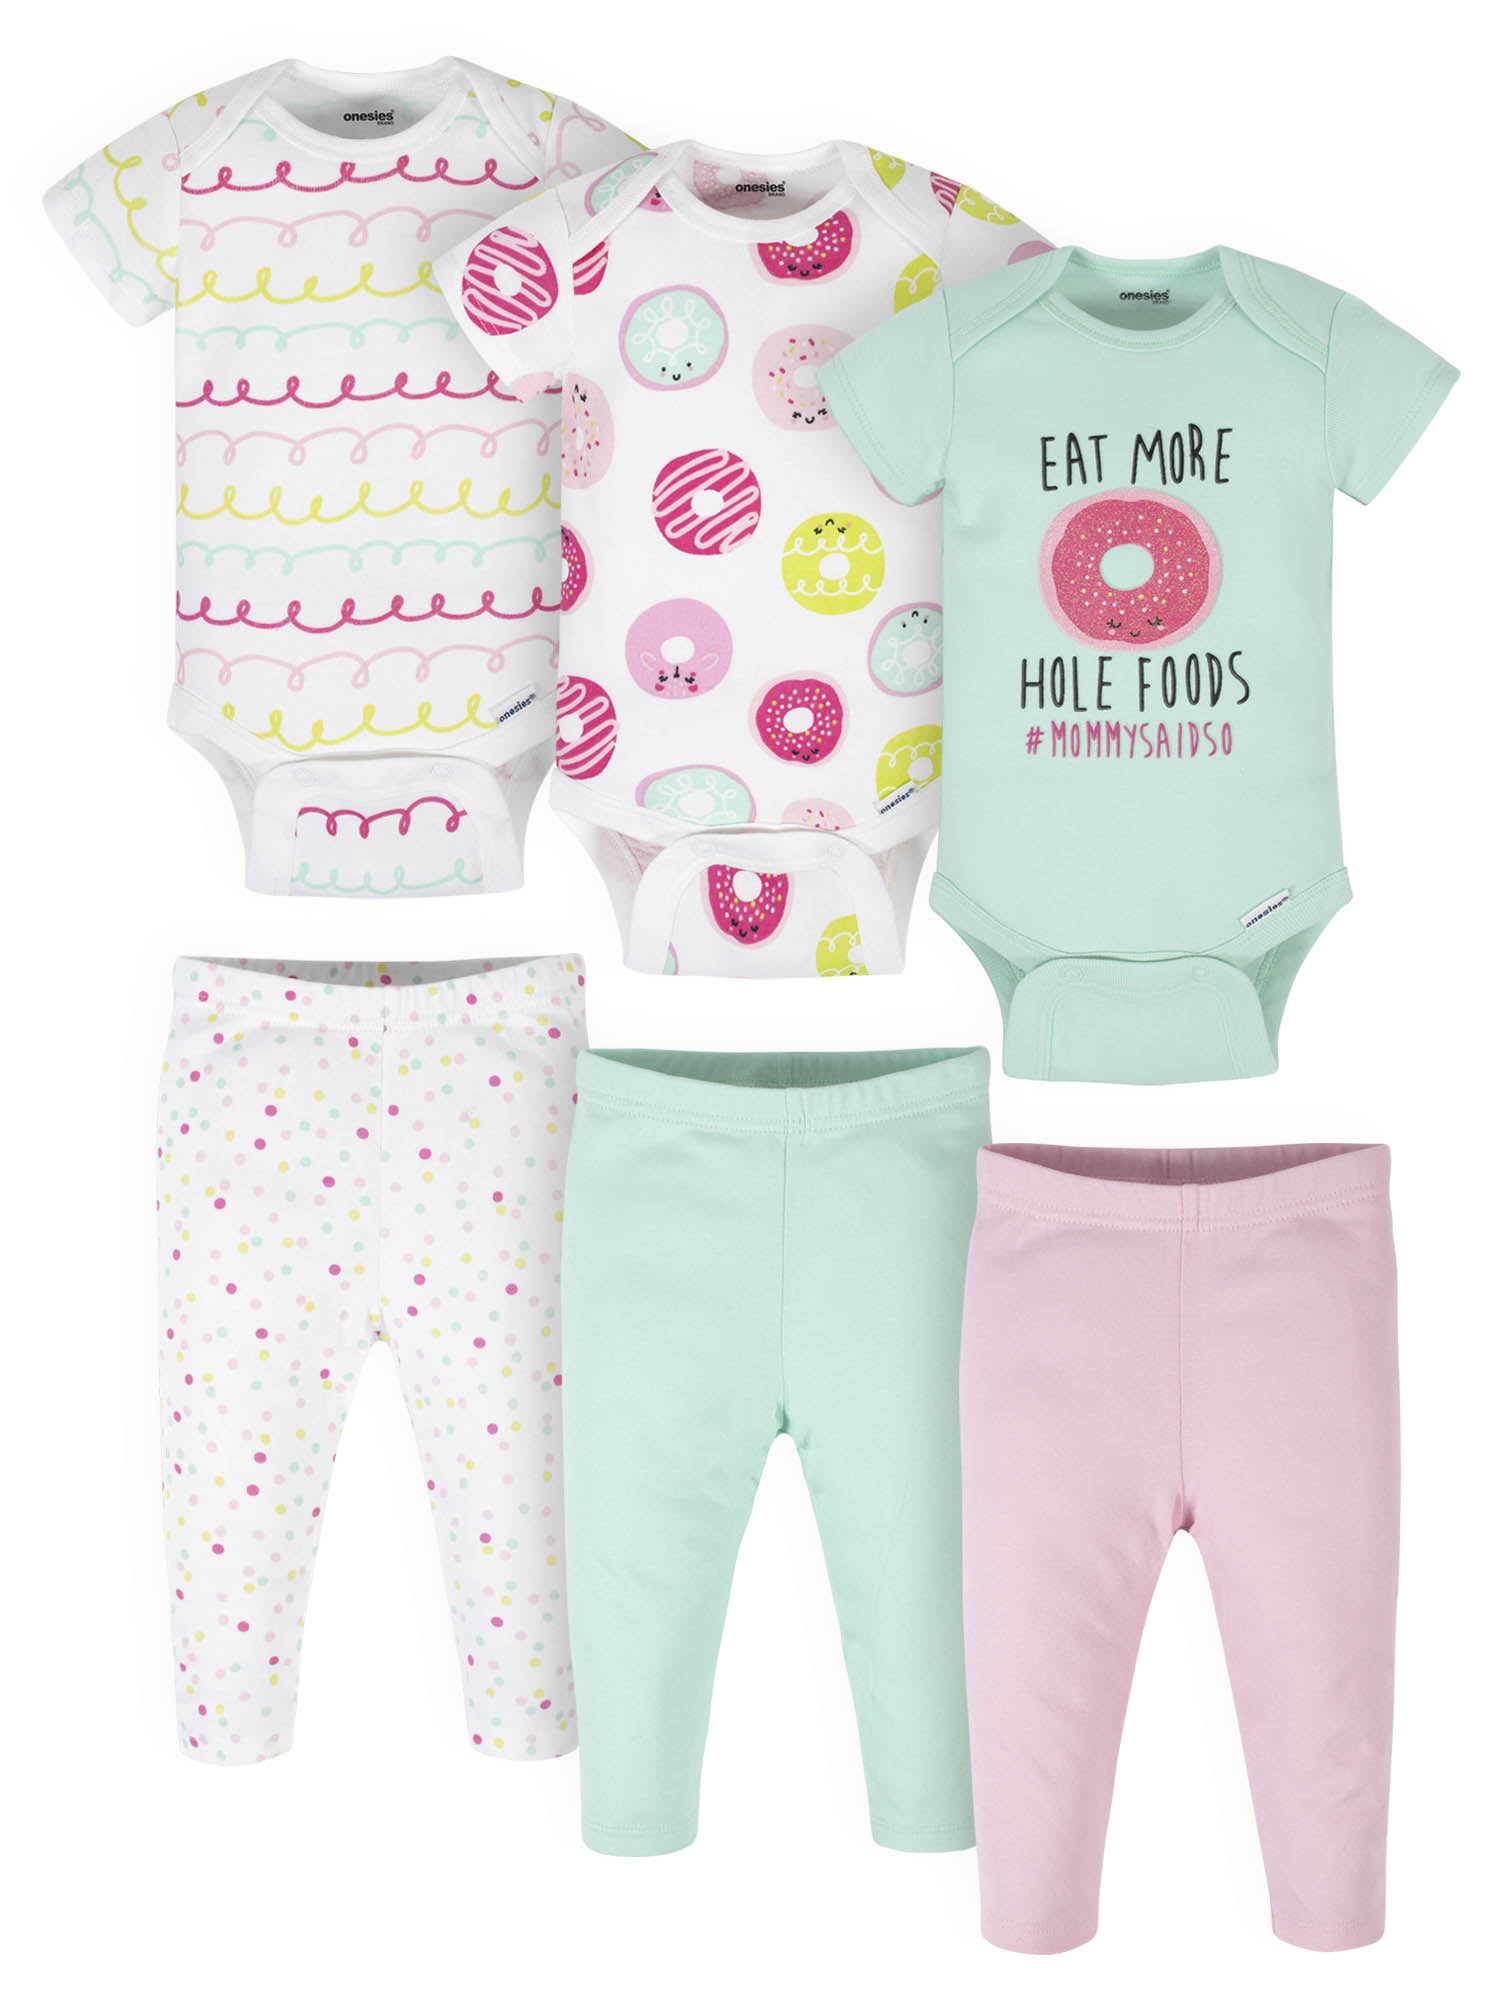 BABY GIRLS BODYSUIT AND LEGGING SET COLOUR PINK BNWT SIZE 6-9 MONTHS 